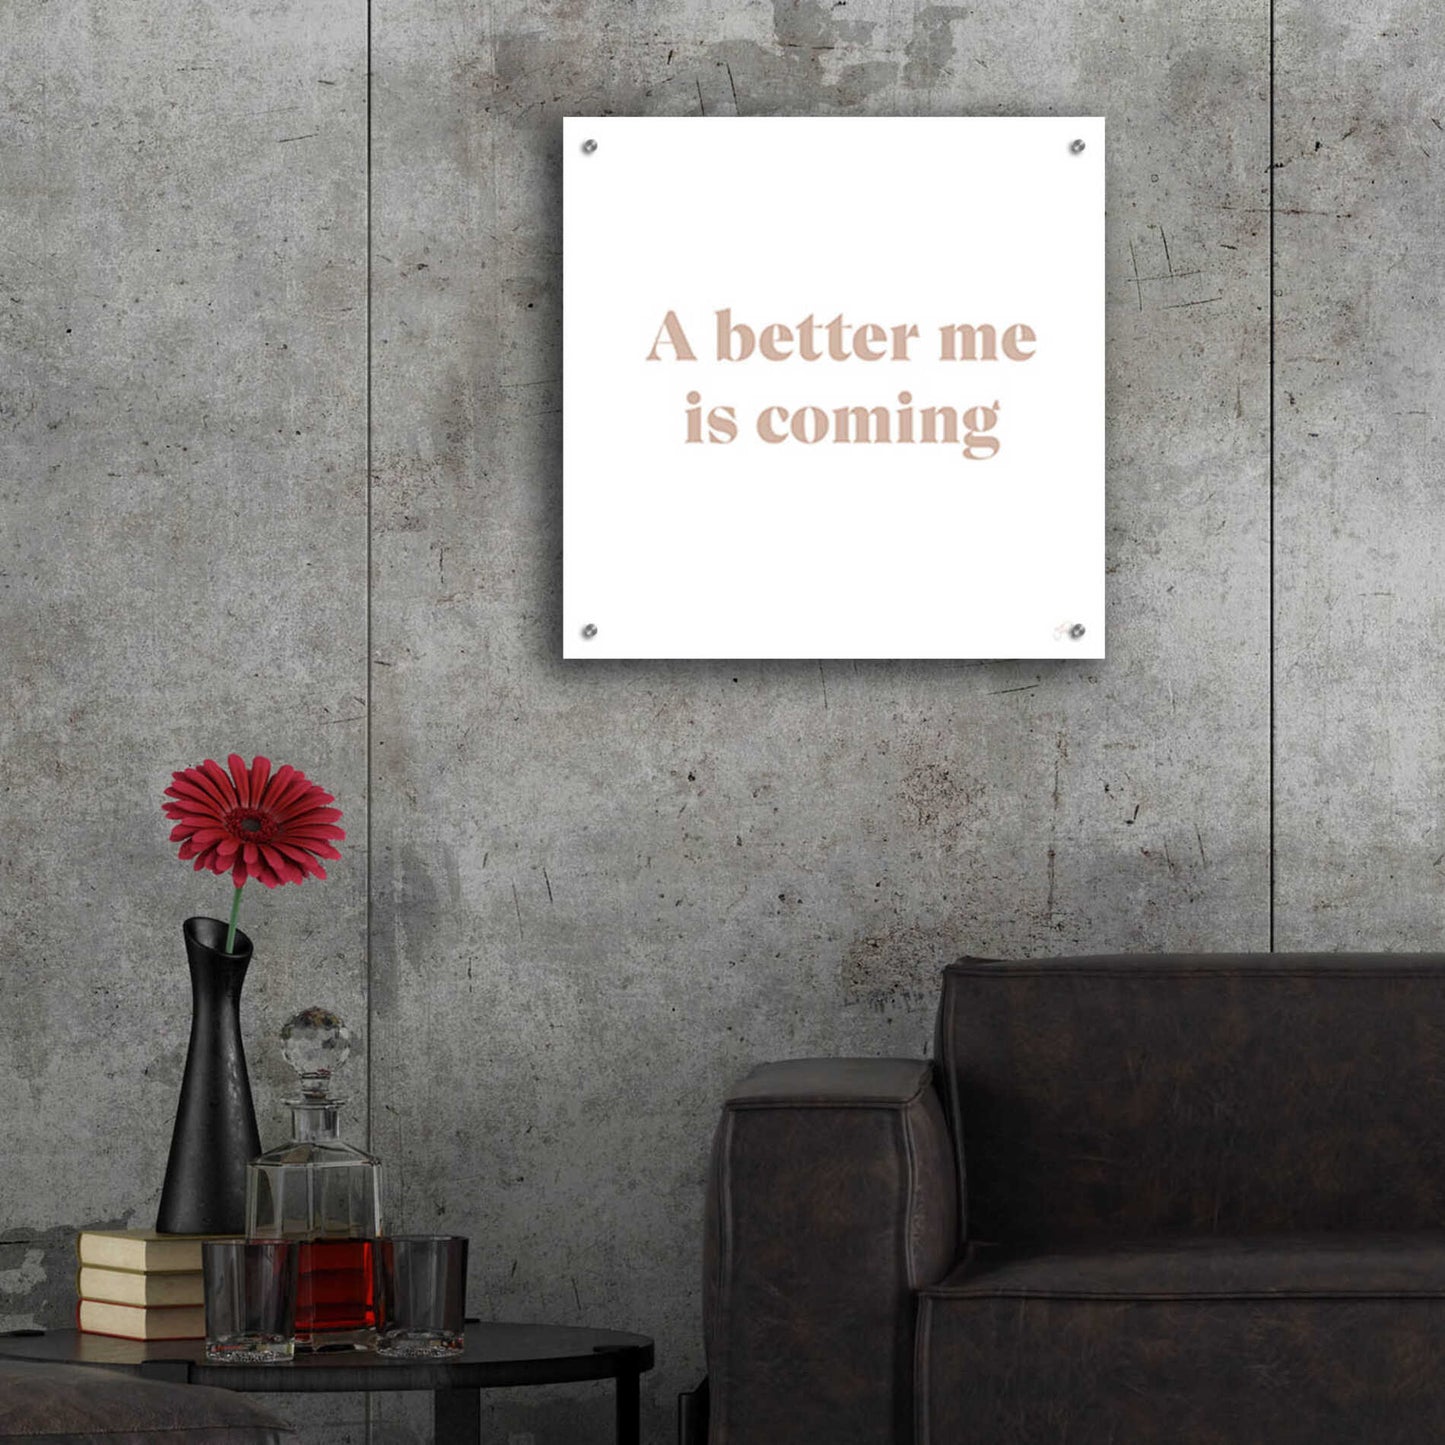 Epic Art 'A Better Me is Coming' by Yass Naffas Designs, Acrylic Glass Wall Art,24x24